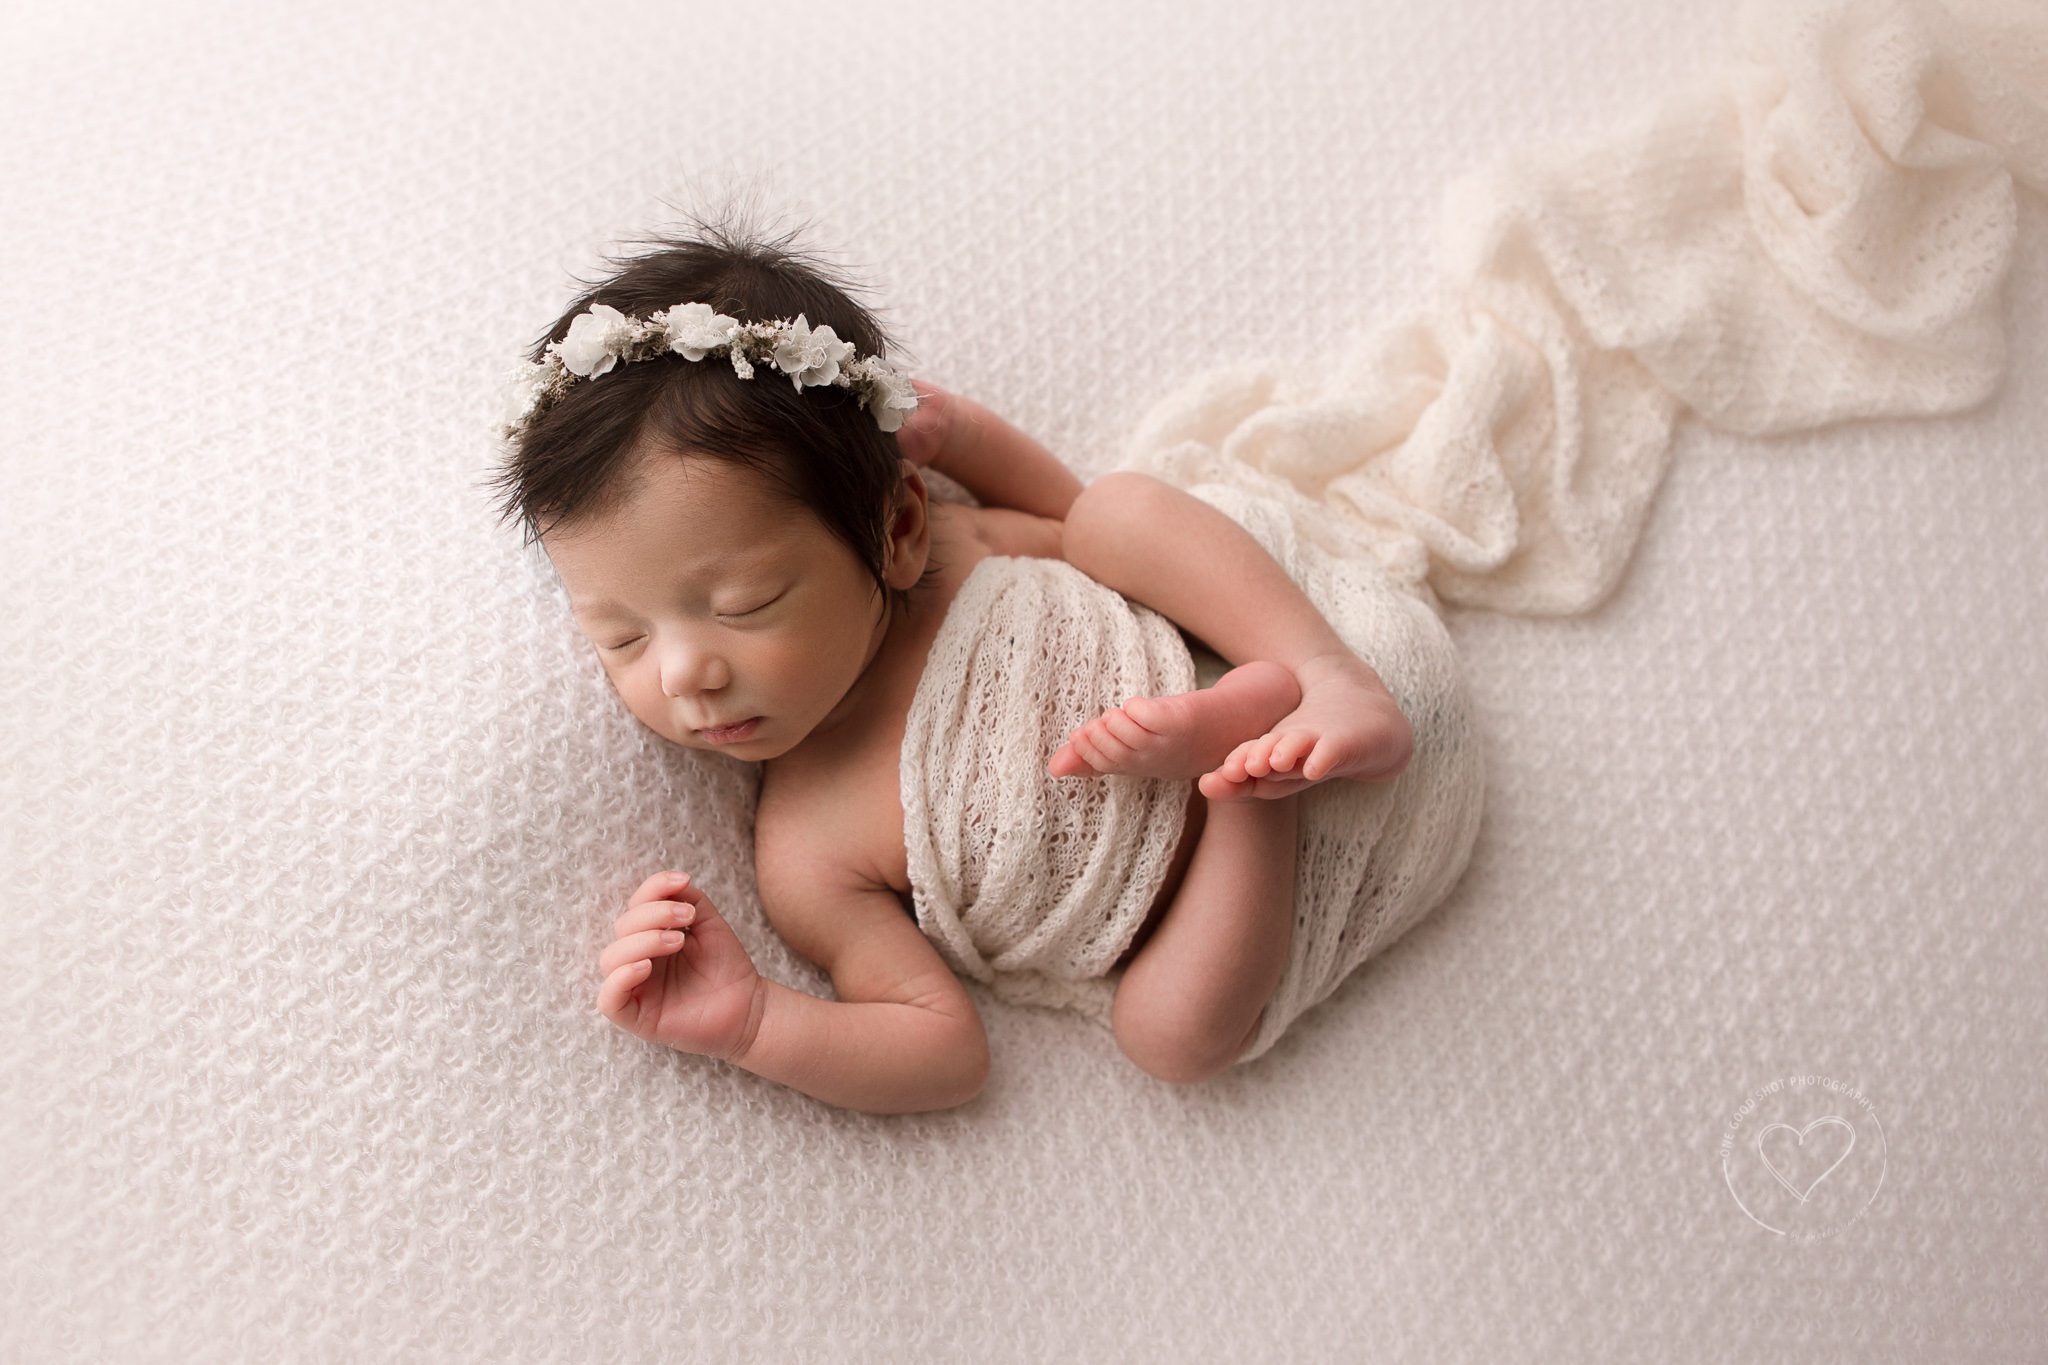 Fresno Newborn Photographer, huck finn pose from above, baby girl smiling, wearing floral halo